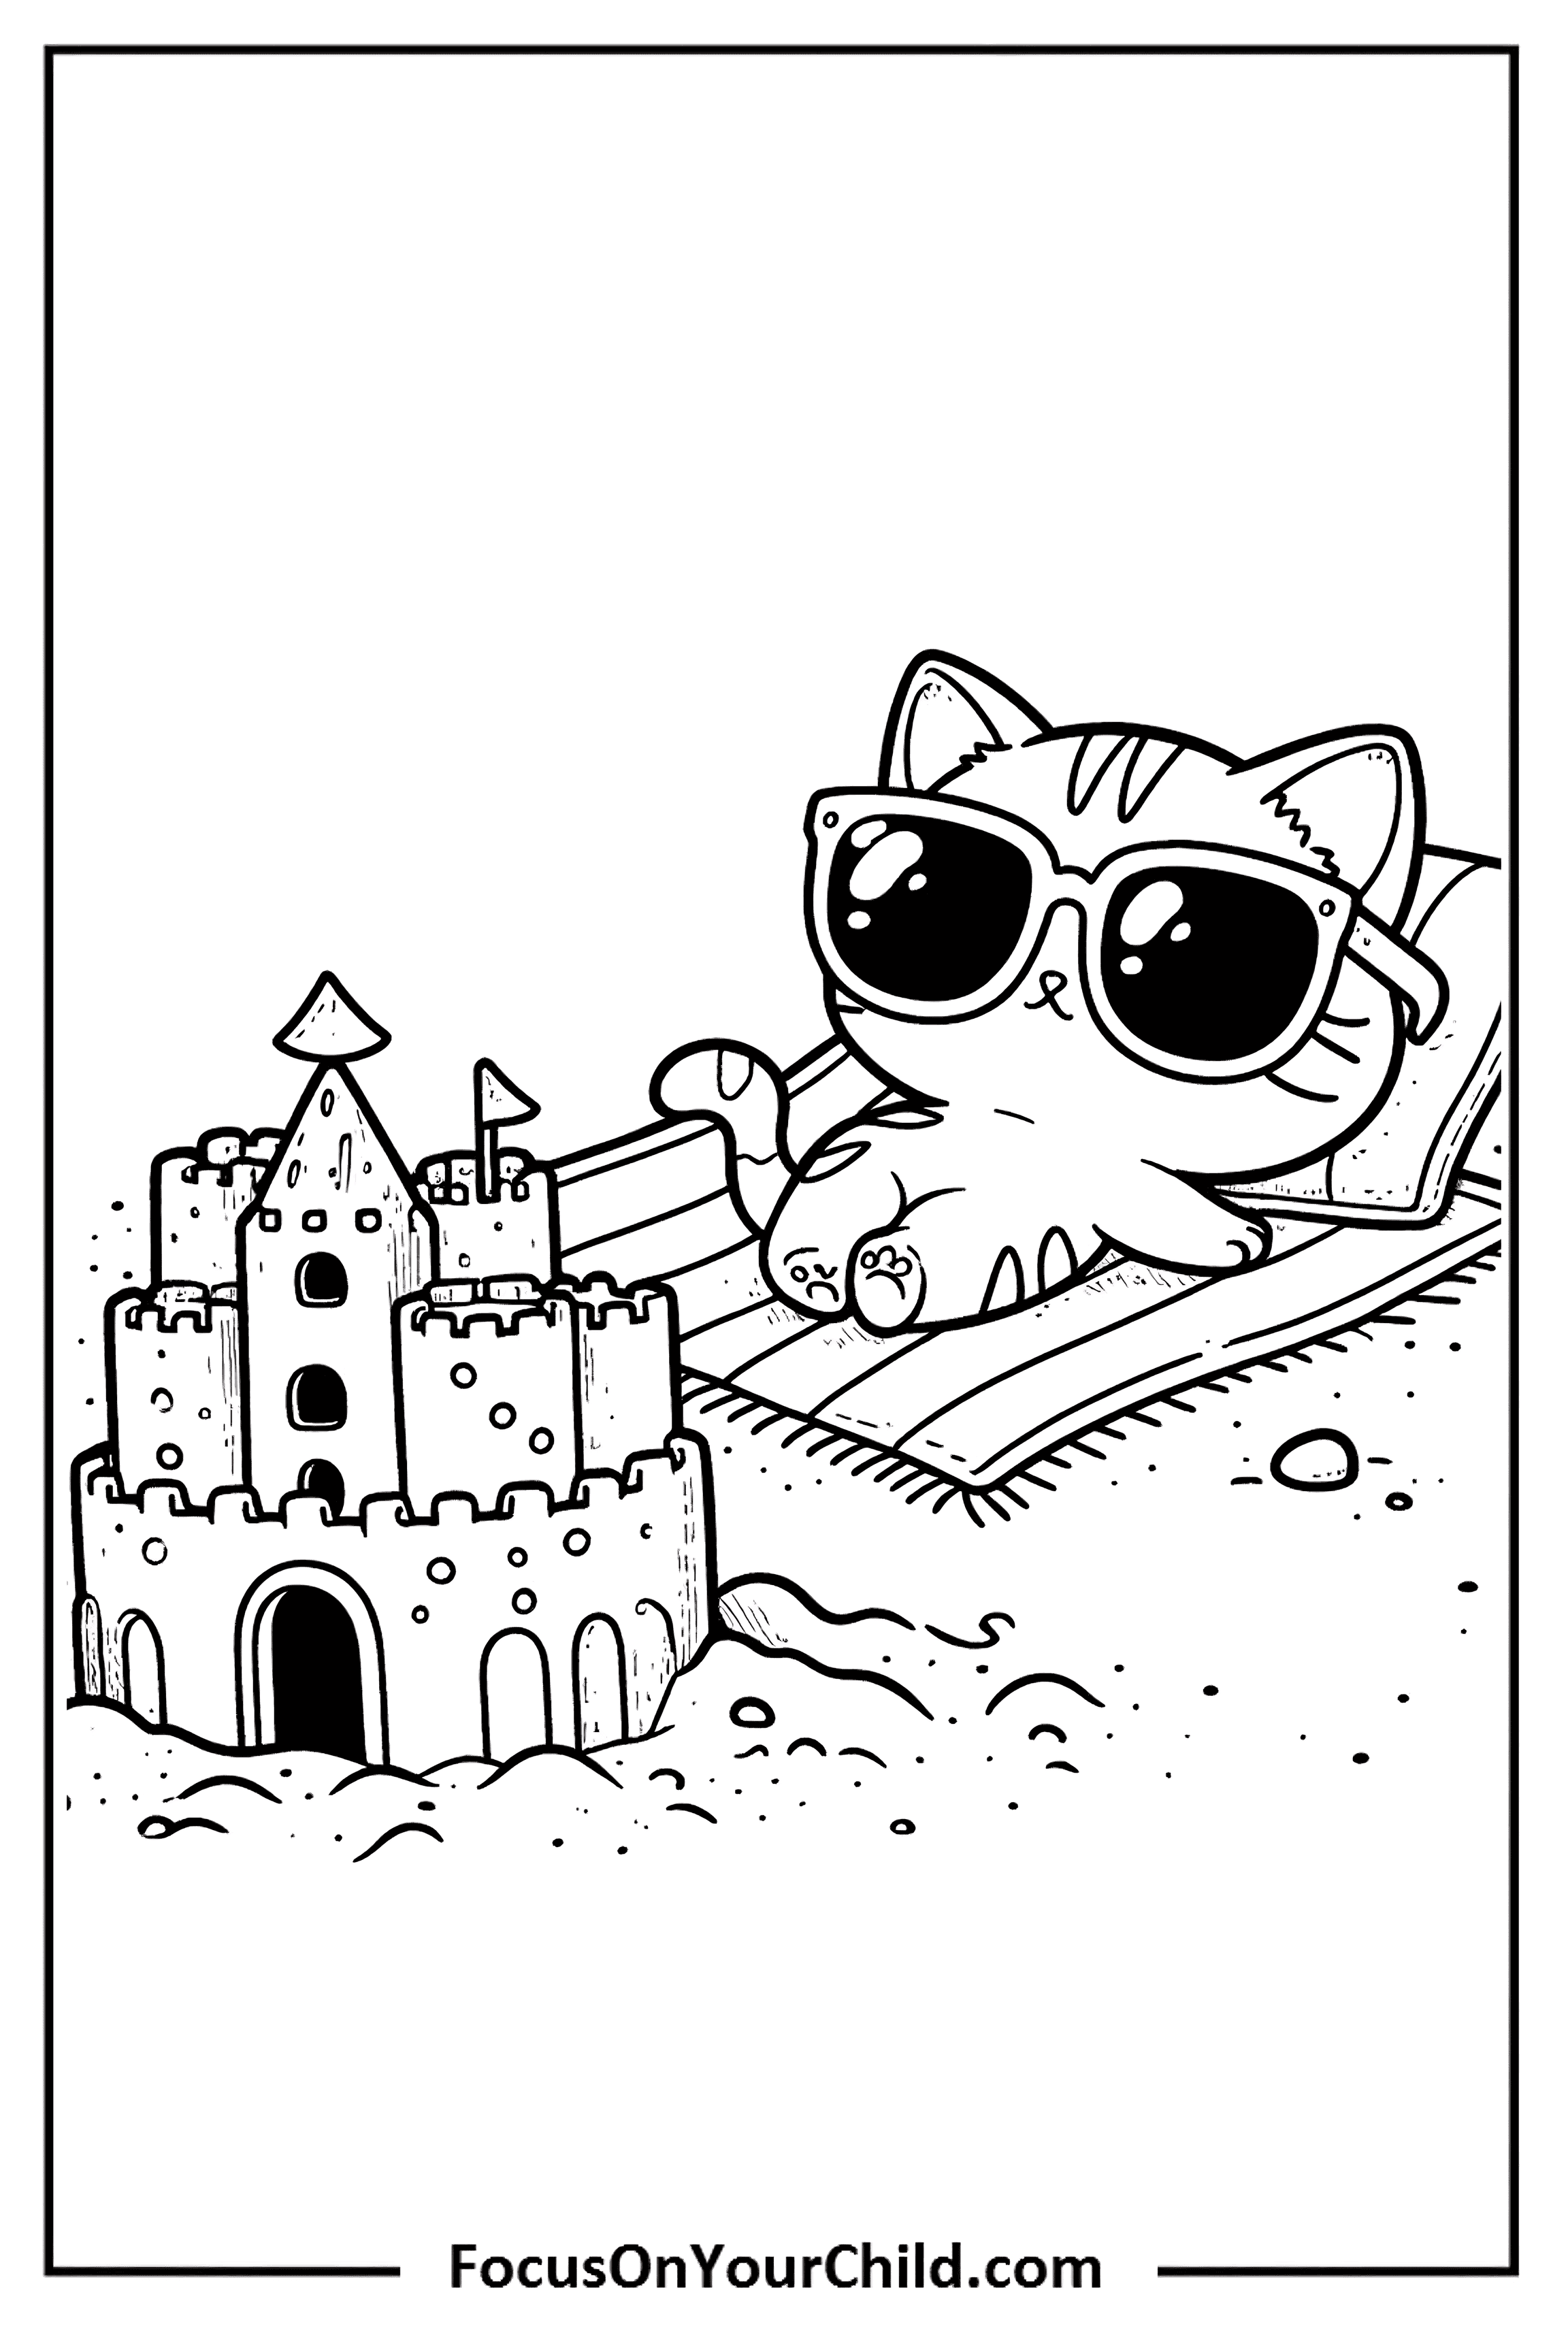 Charming cat in sunglasses lounging on beach towel next to intricate sandcastle.